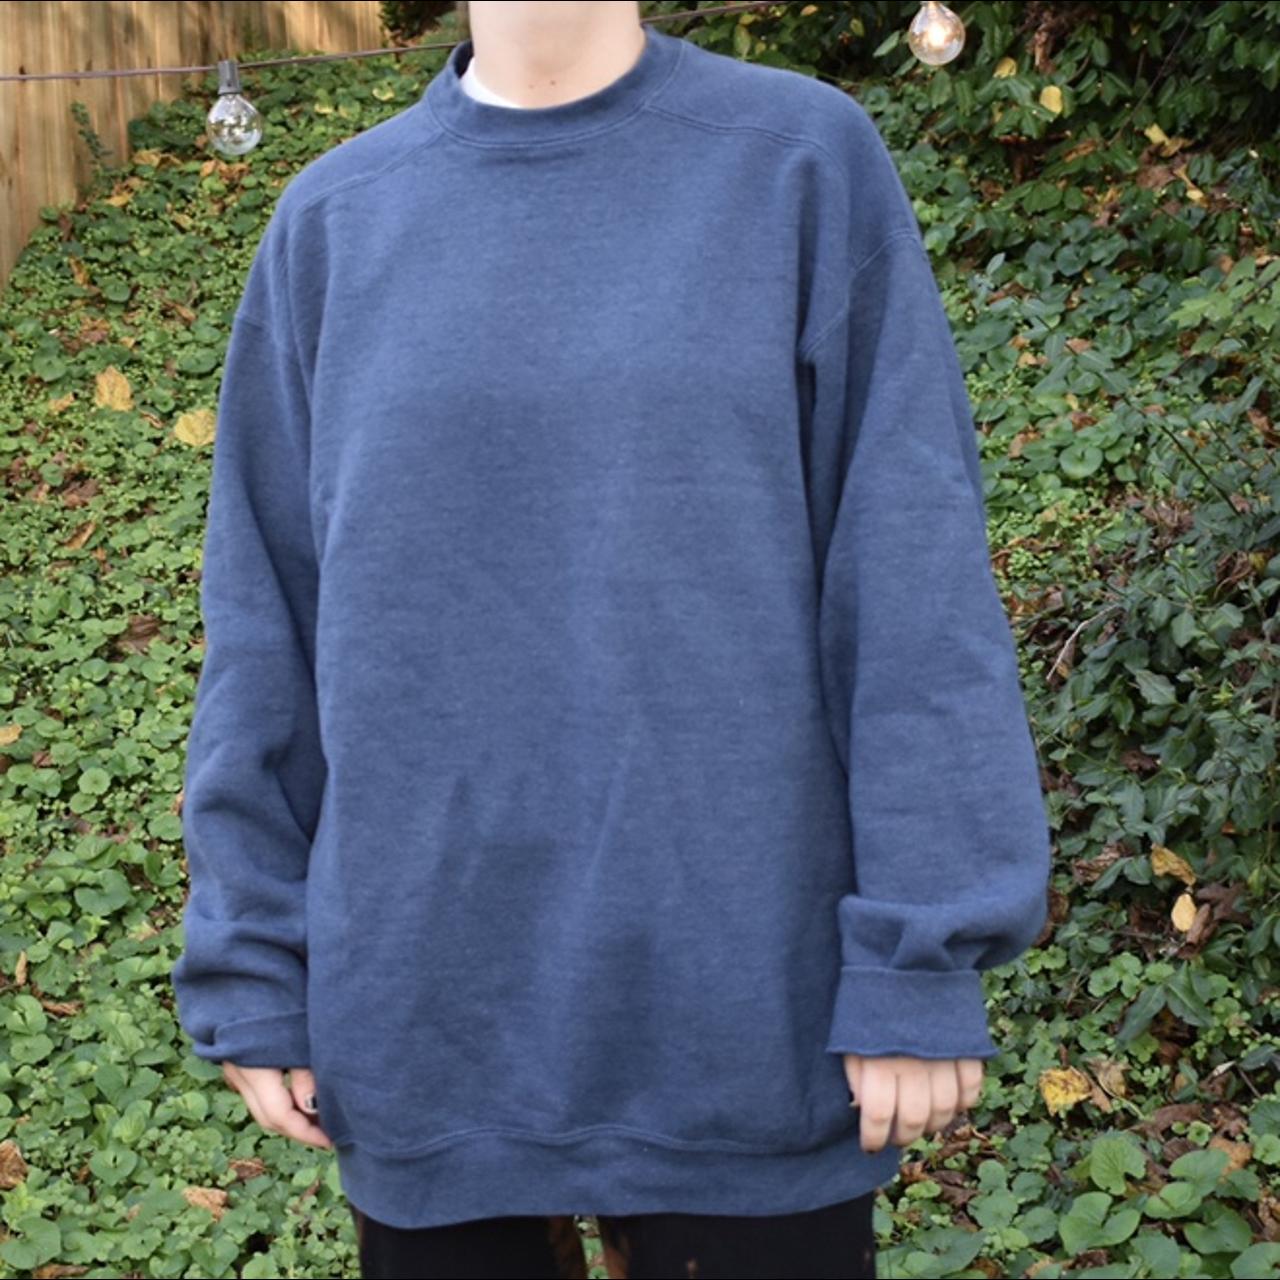 Product Image 1 - Oversized Vintage Wilson Crewneck

Thick and